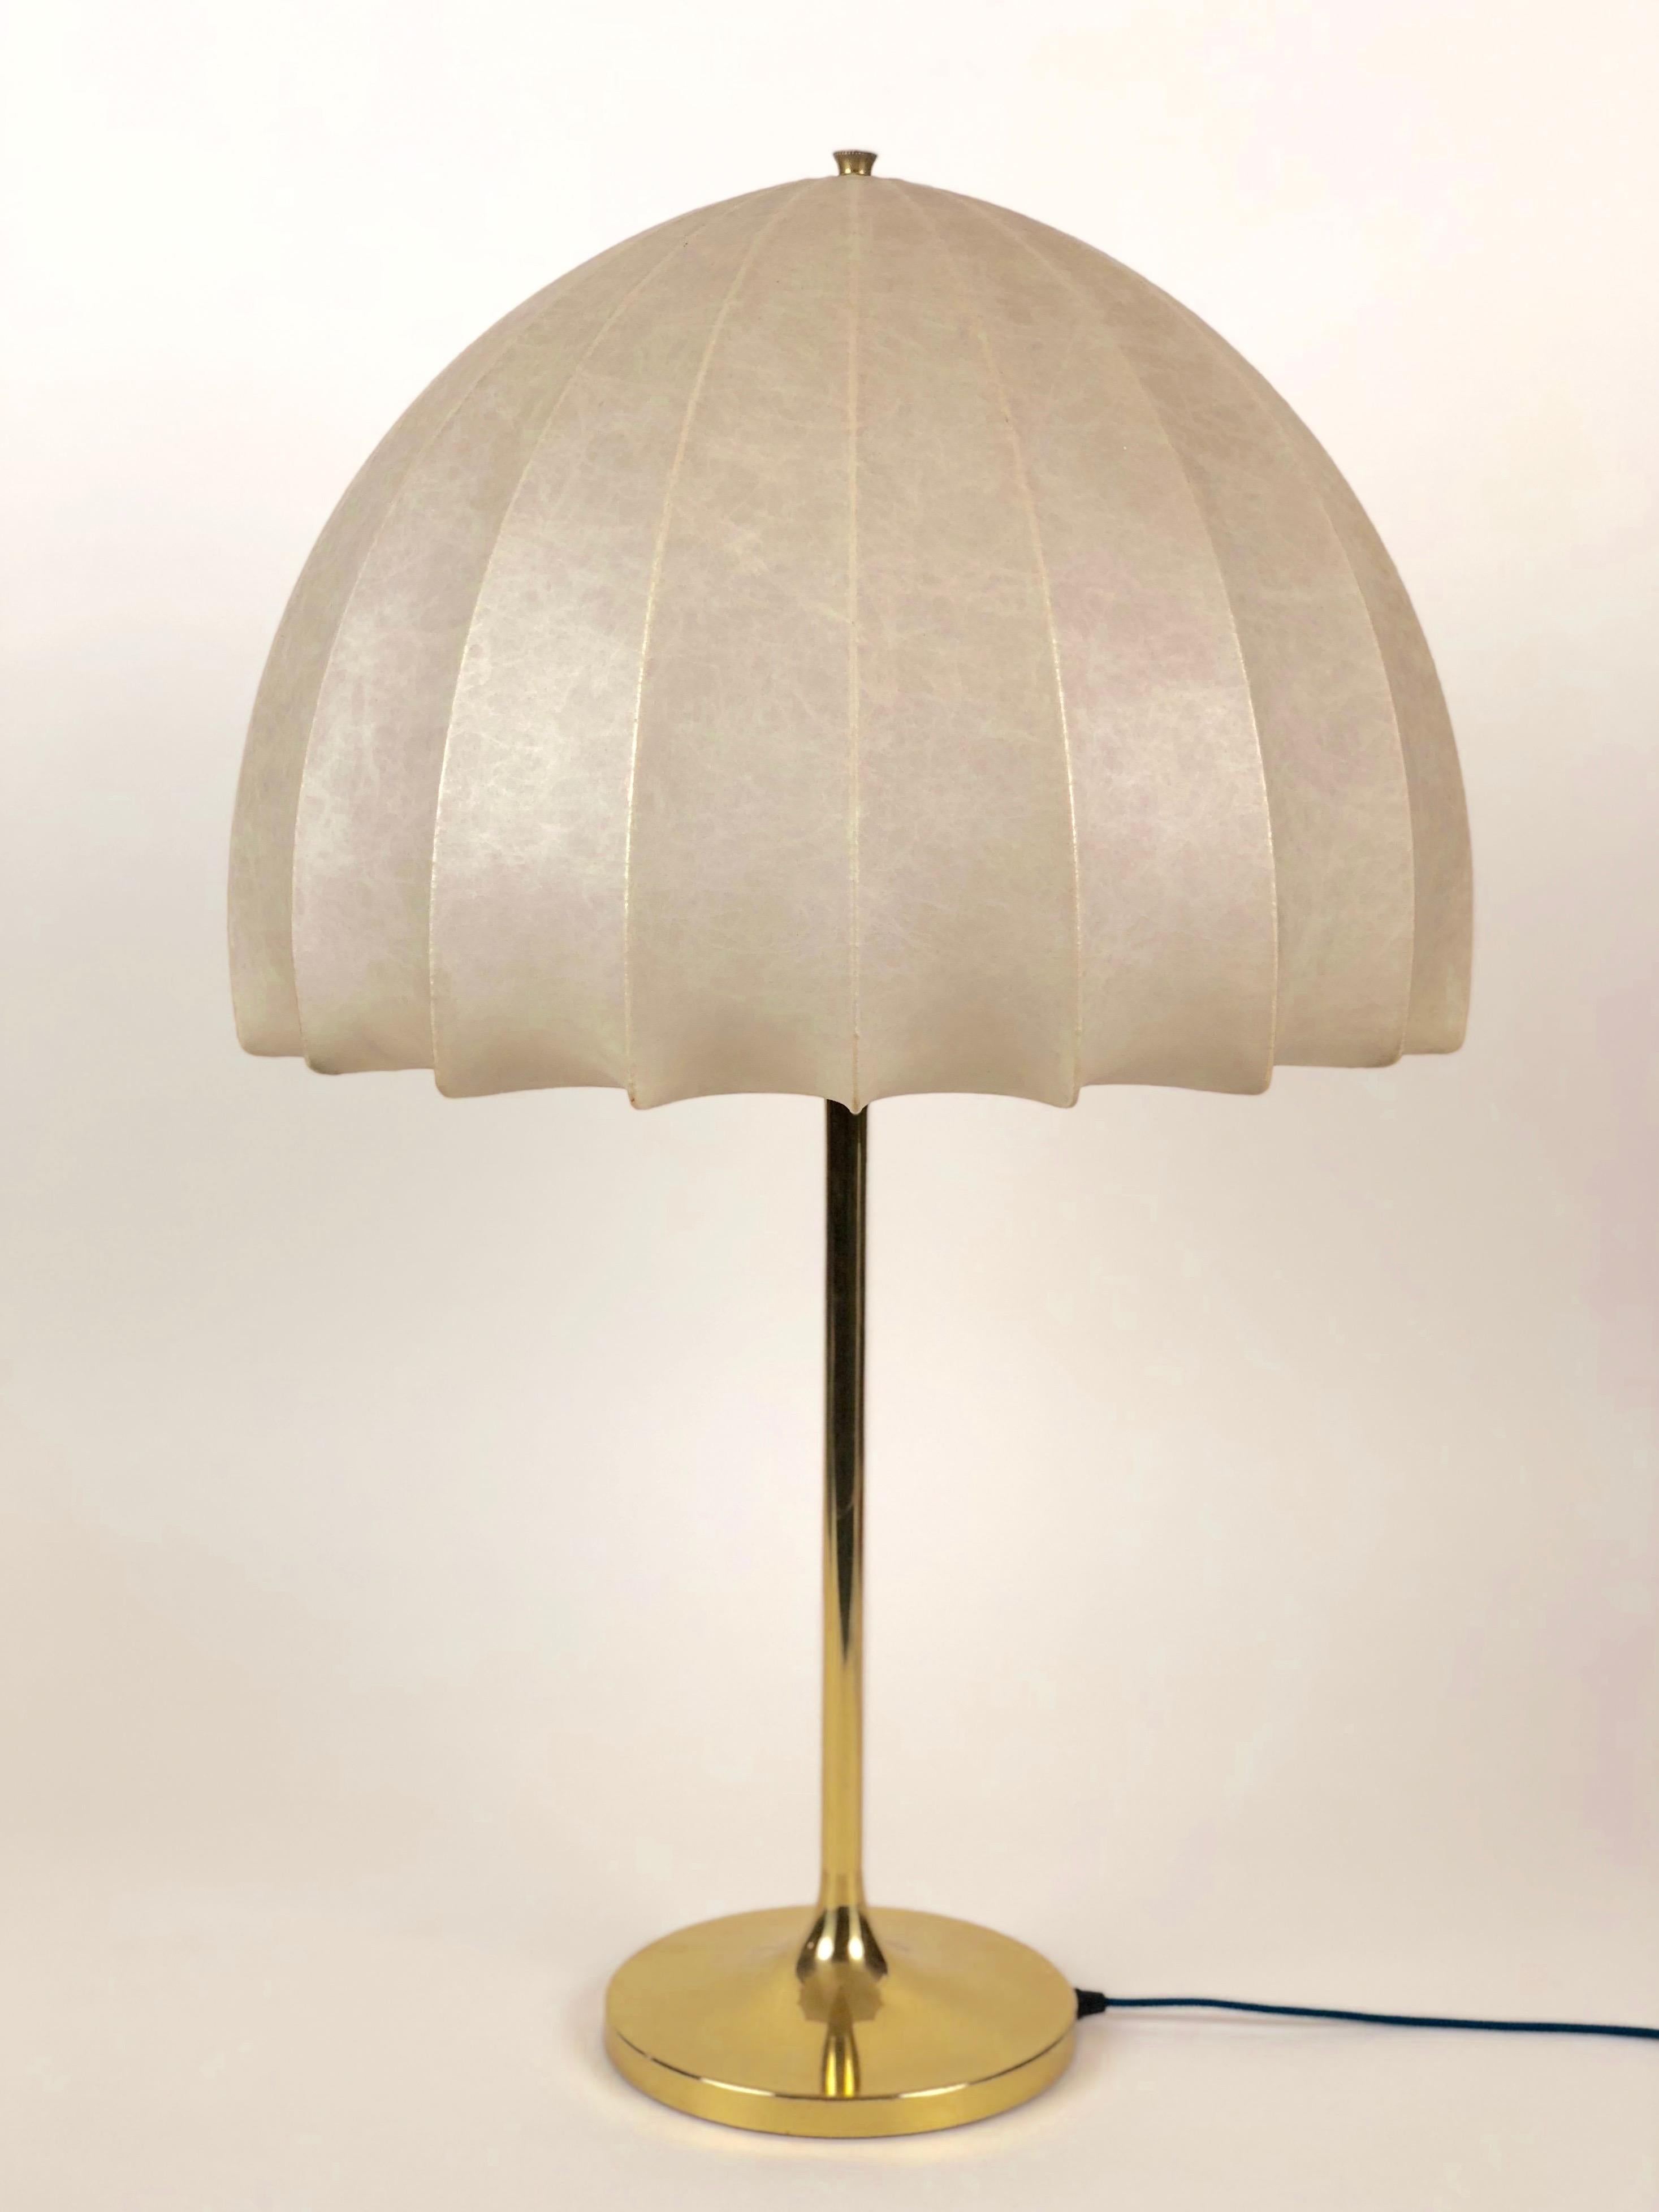 Mushroom styled lamp made in the 1970s with a soft synthetic skin and a tall brass stand. There are no holes tears in the skin.
The lamp has been newly rewired and has a cloth covered cable.